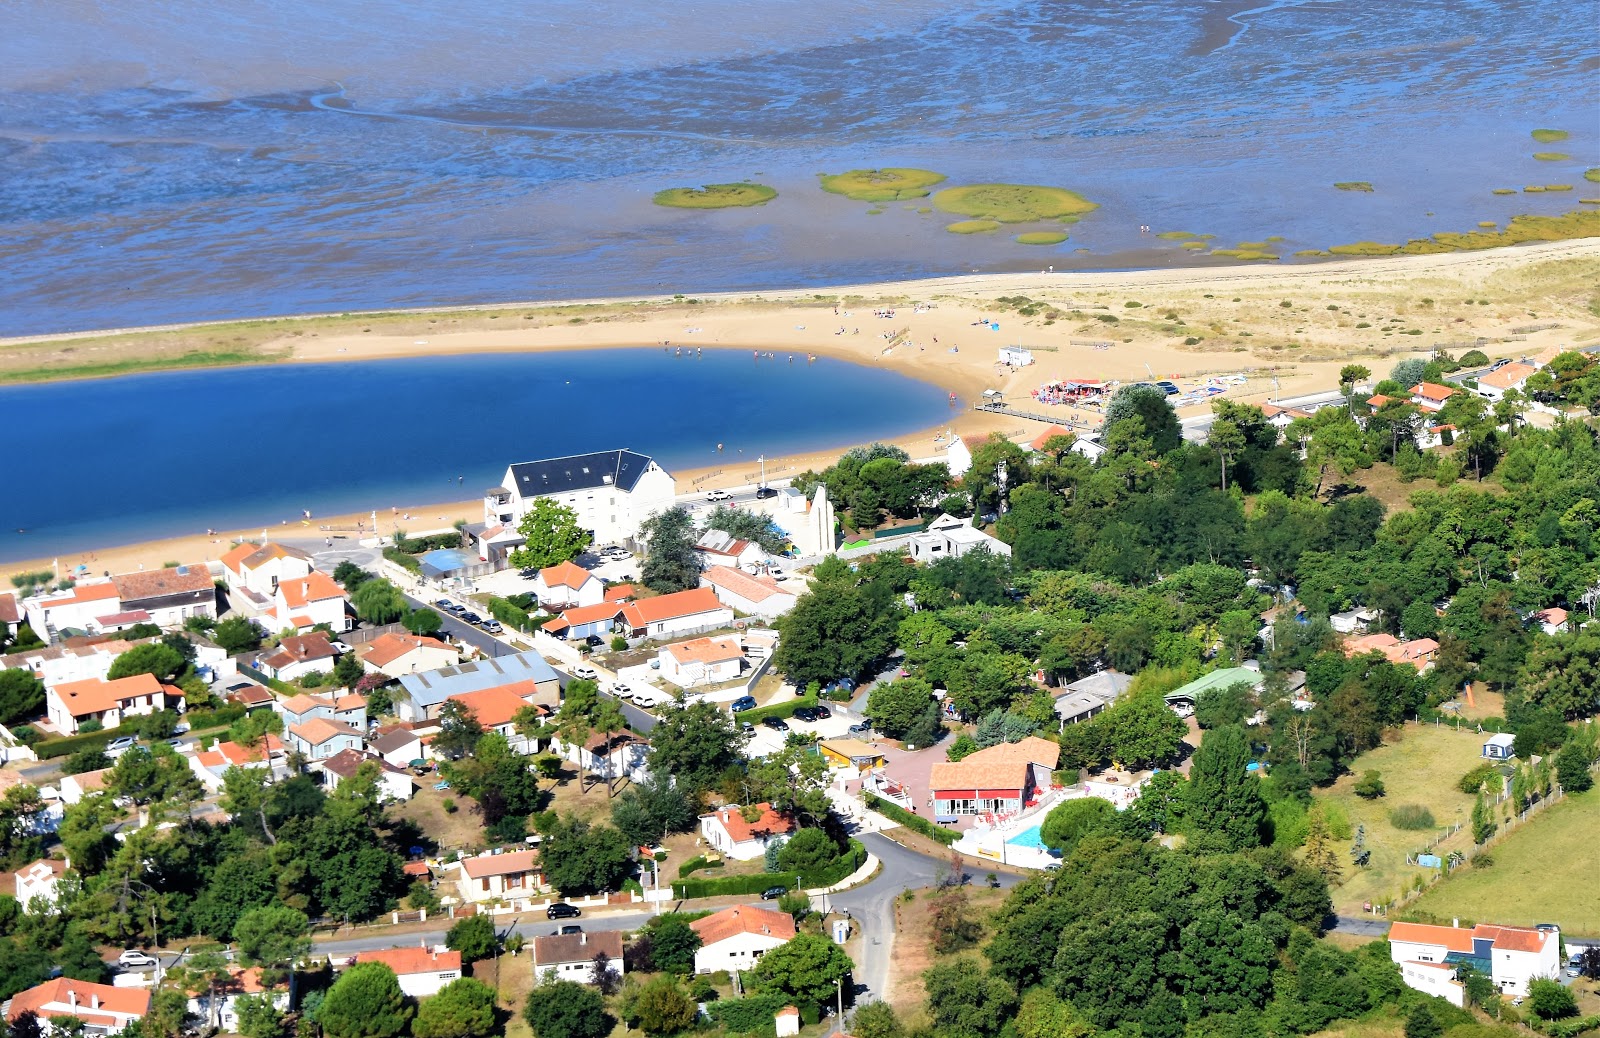 Photo of Plage de Marennes with very clean level of cleanliness